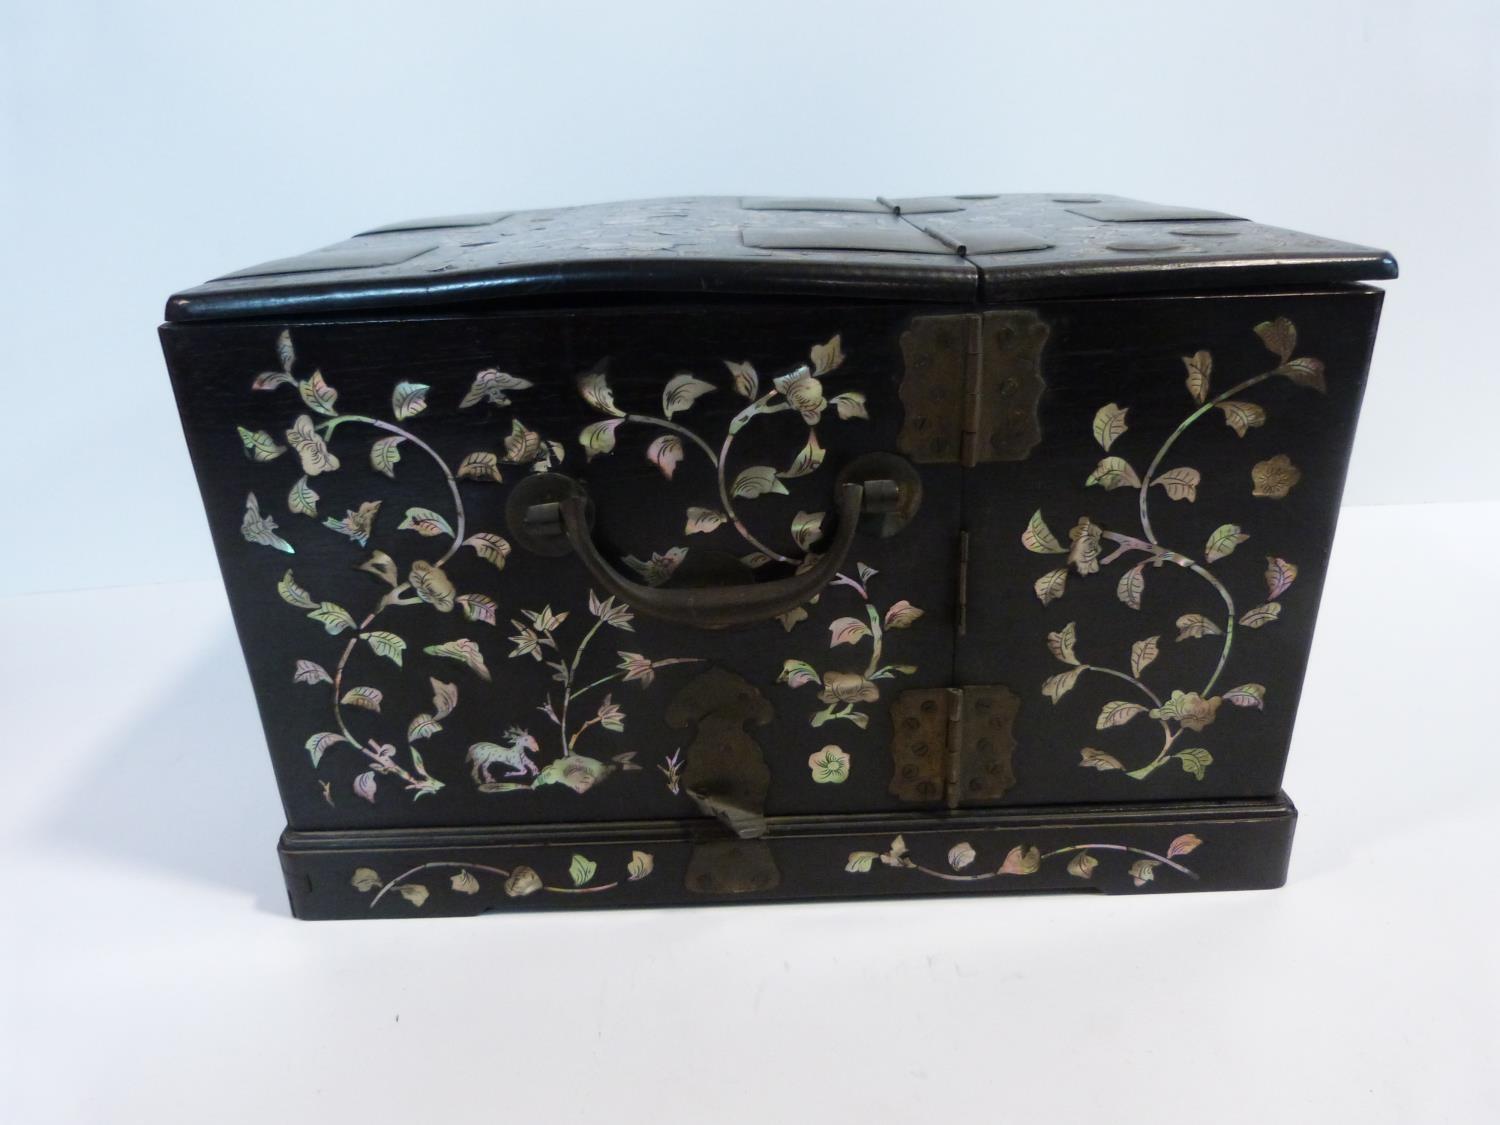 A 19th century Chinese rosewood travelling vanity box decorated with inlaid mother of pearl figures, - Image 17 of 22